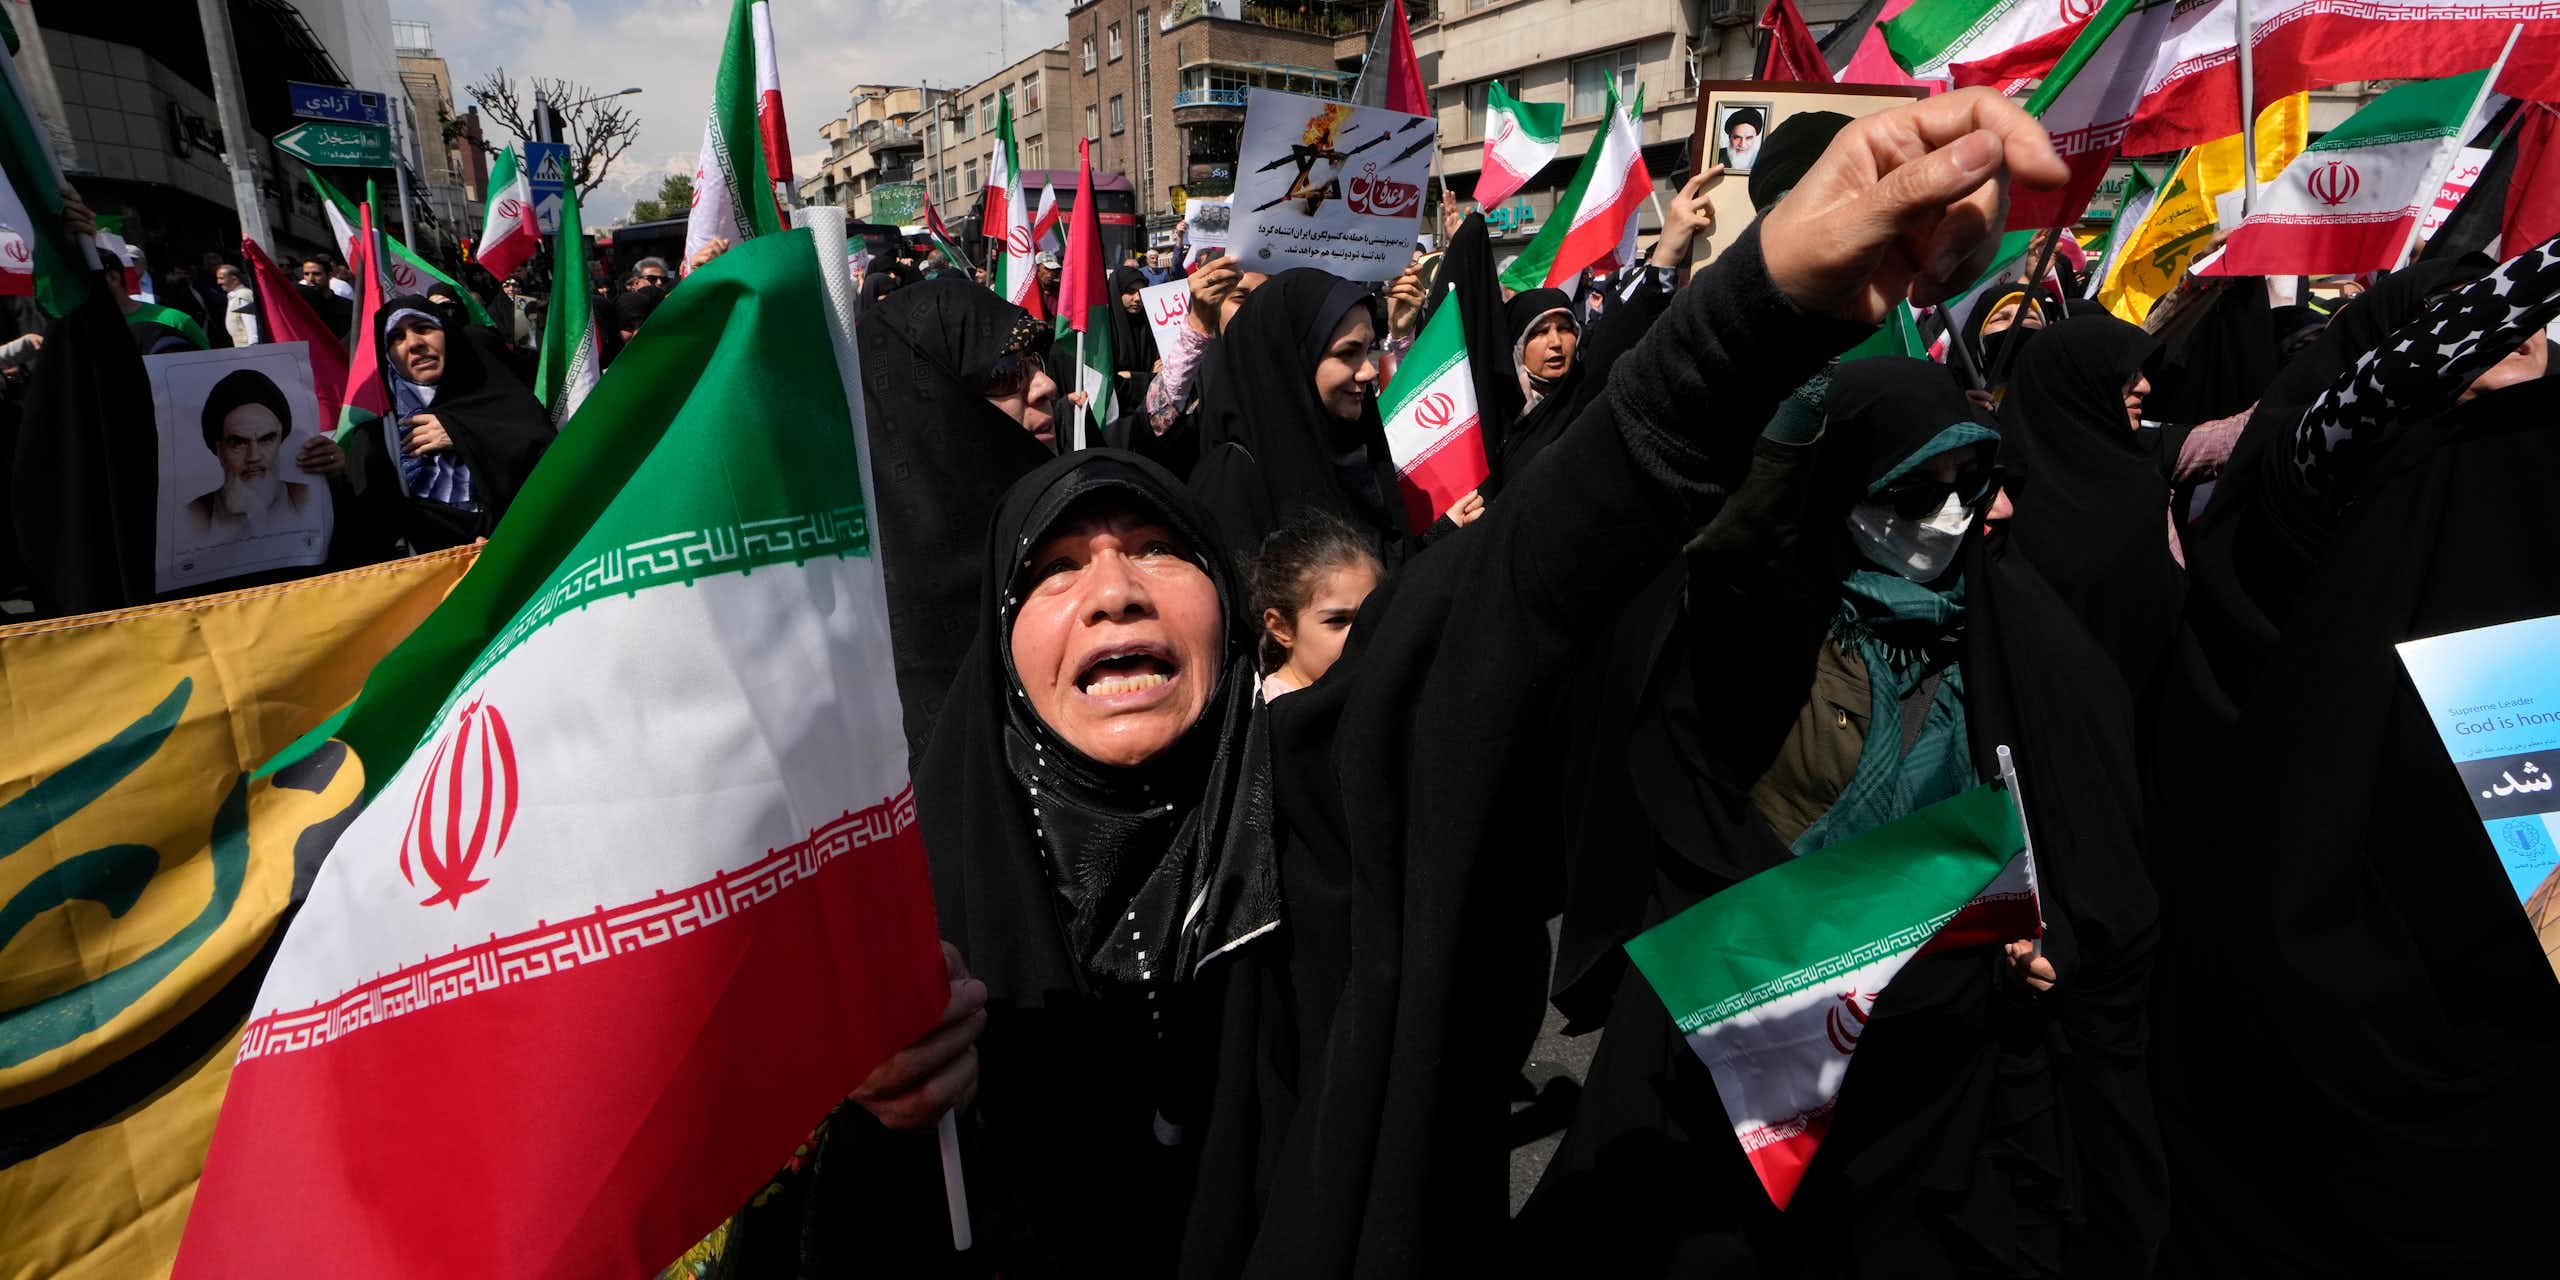 A woman in a black hijab shouts while holding a green, white and red flag.